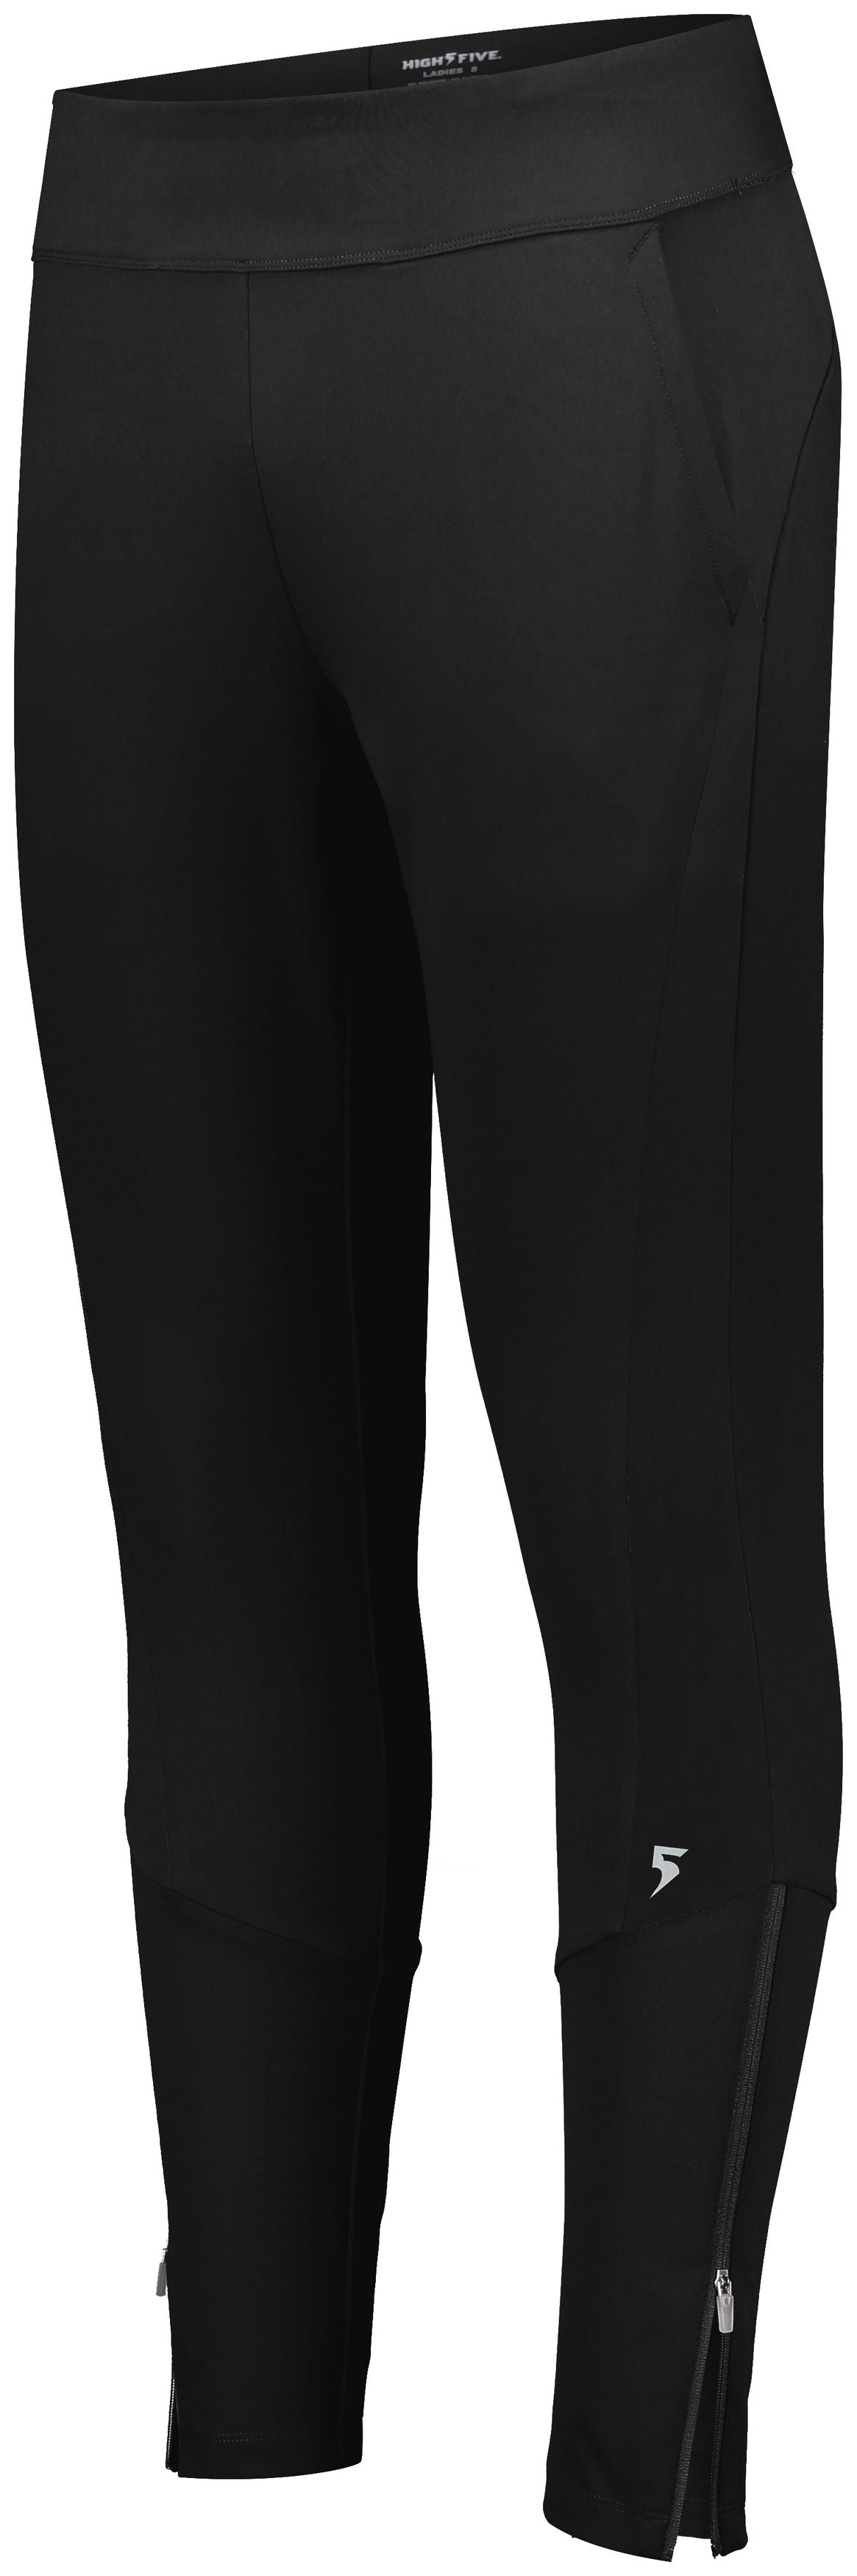 High 5 Ladies Free Form Pant in Black/Black  -Part of the Ladies, Ladies-Pants, Pants, High5-Products product lines at KanaleyCreations.com